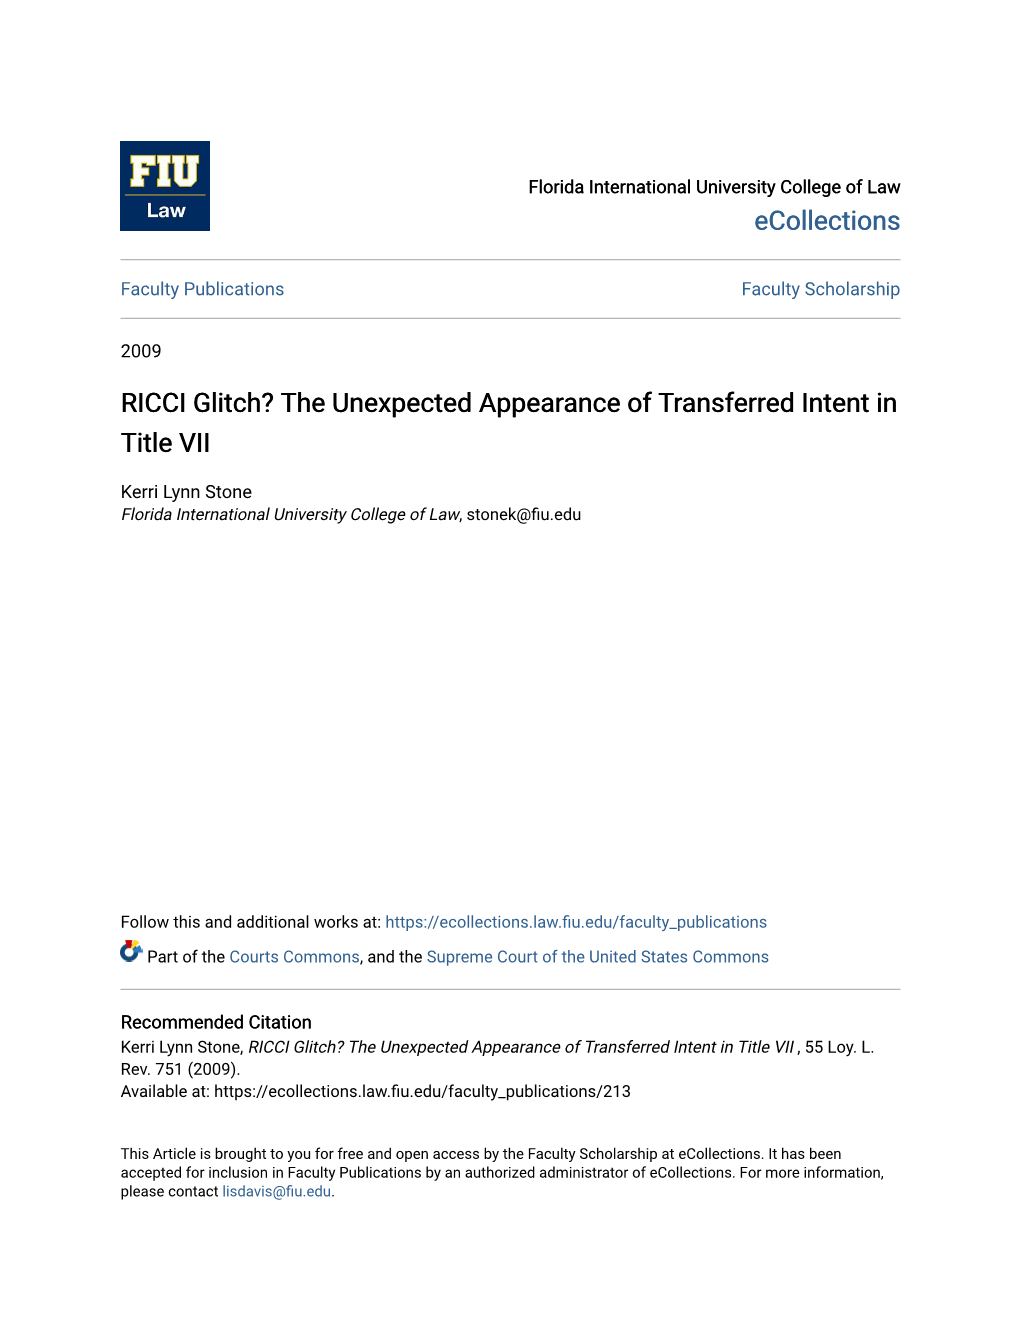 The Unexpected Appearance of Transferred Intent in Title VII